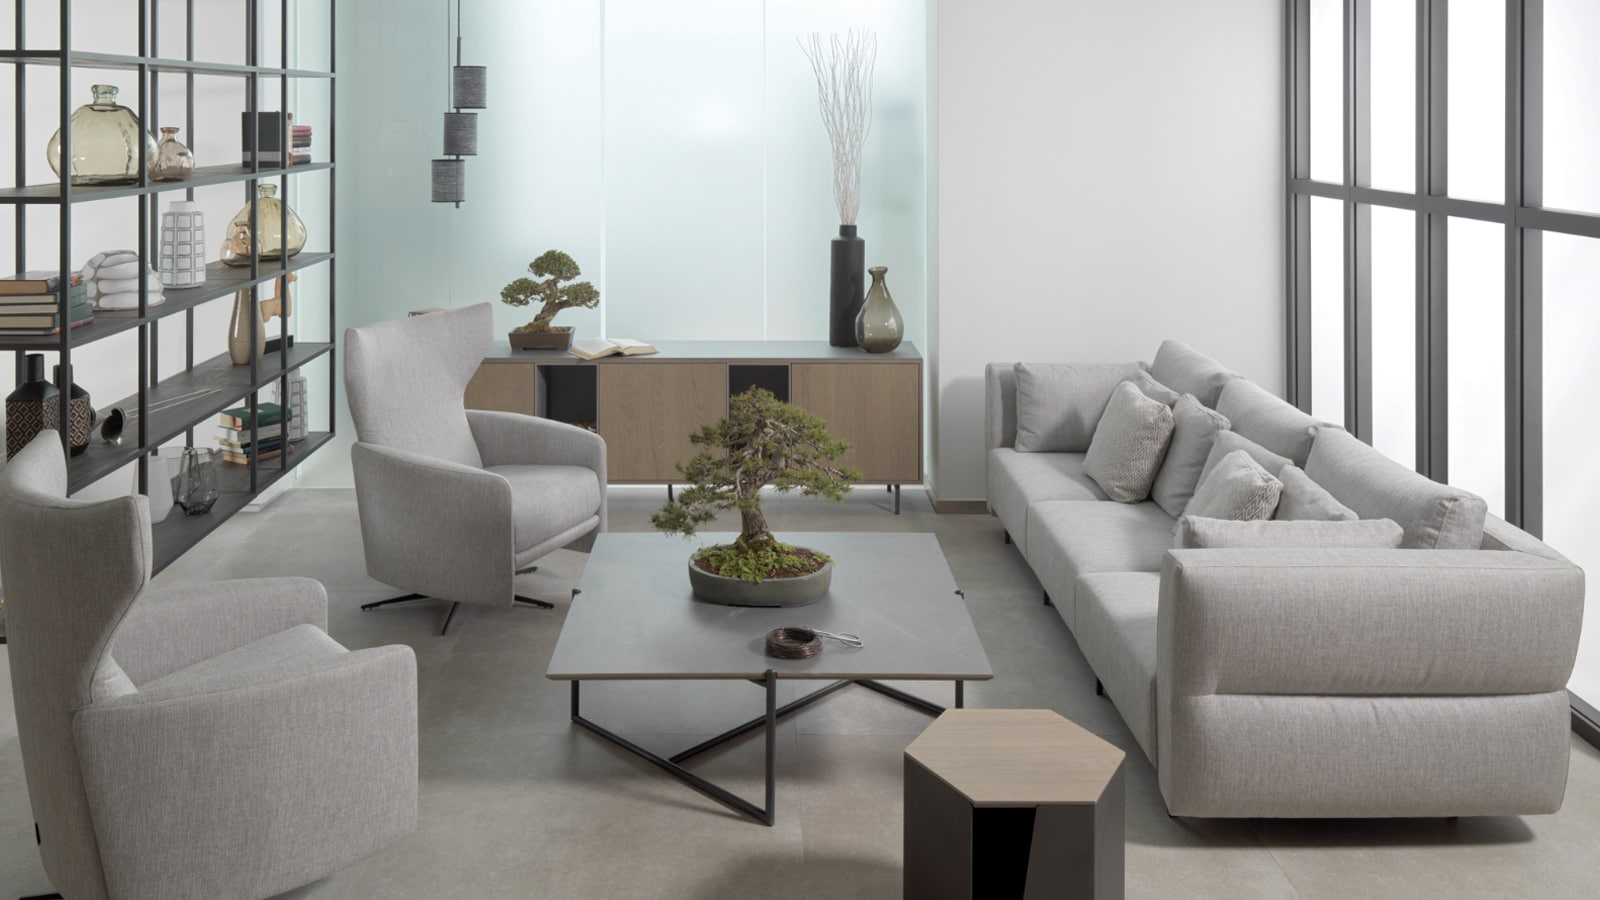 New Gamadecor sofas for contemporary living rooms